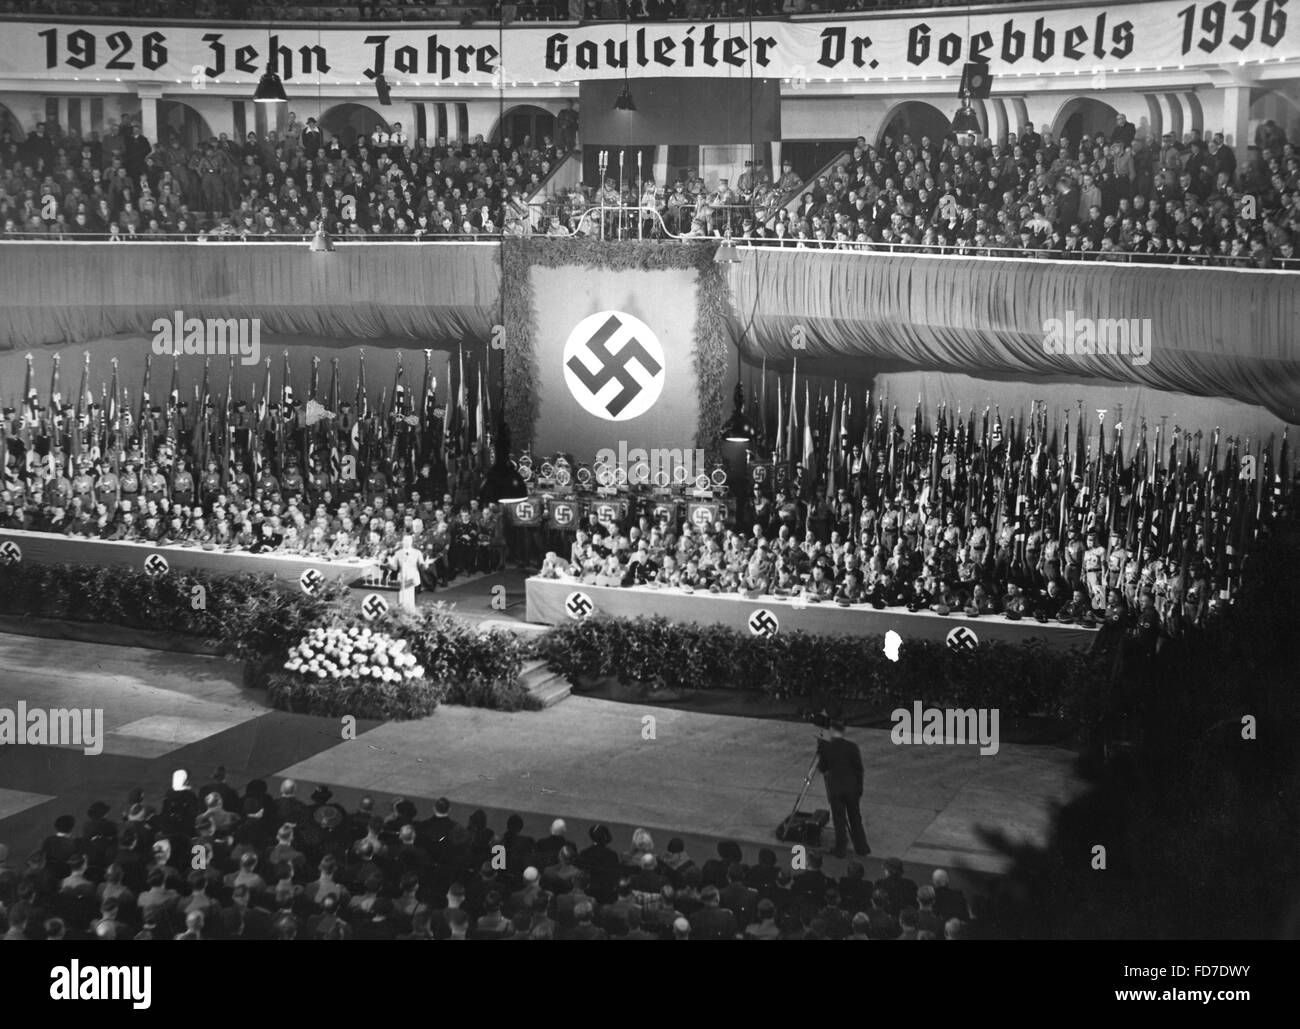 Rally in the Sportpalast on the occasion of the anniversary of the Gau with Joseph Goebbels, 1936 Stock Photo